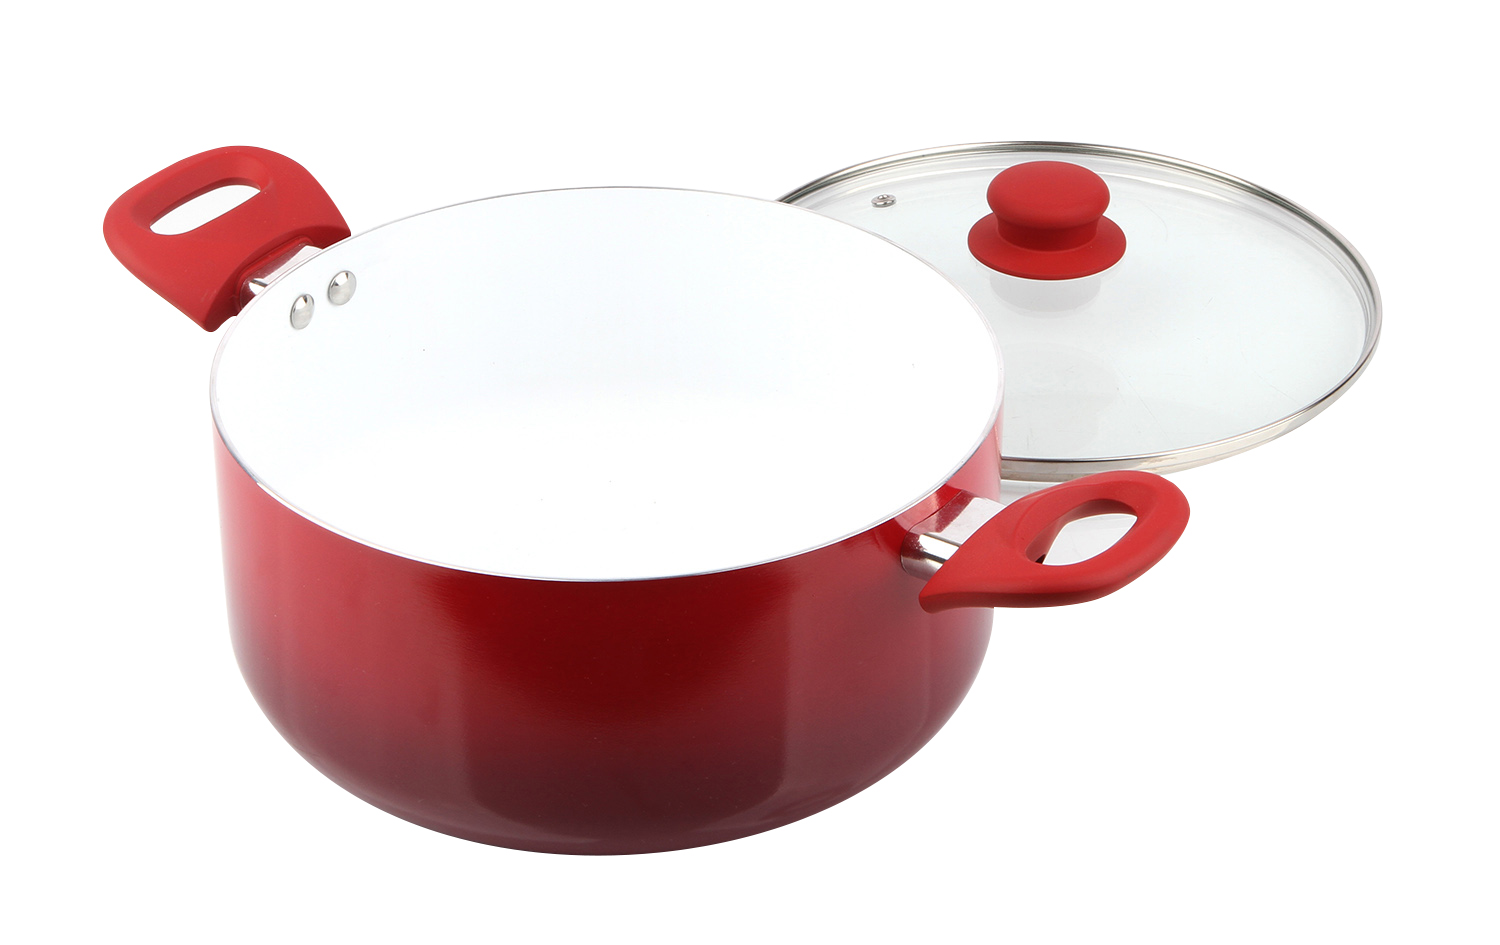 Mainstays Ceramic Nonstick 12 Piece Cookware Set, Red Ombre - image 3 of 8